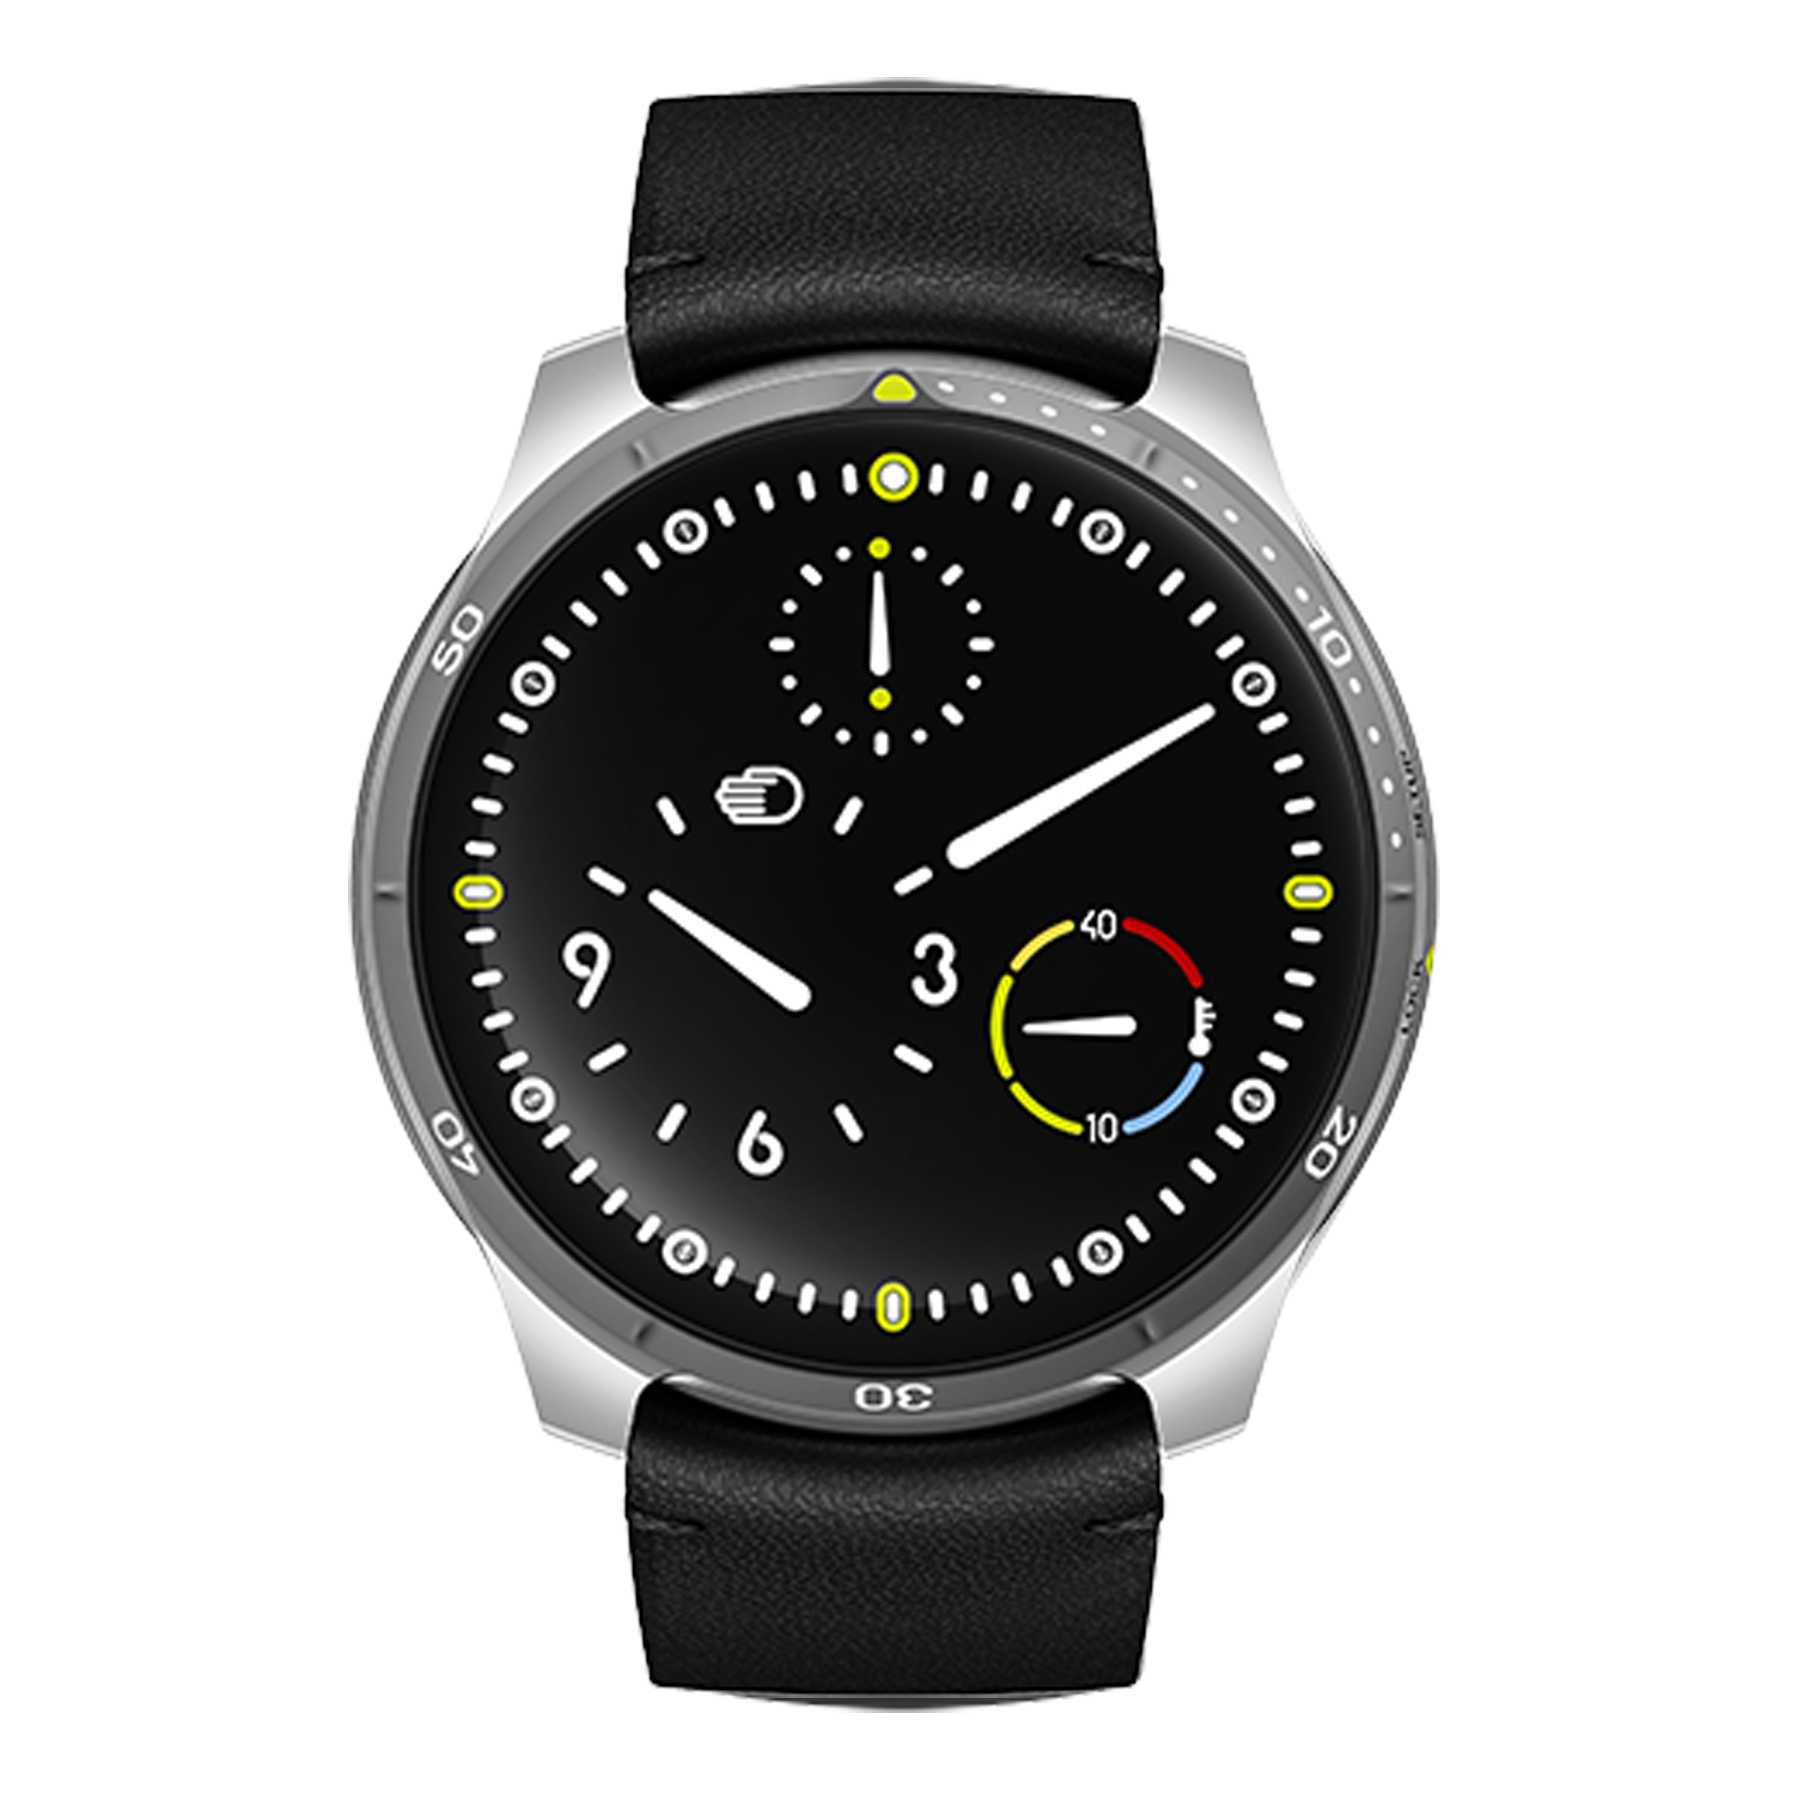 Ressence Introduces the Minimalist and Affordable Type 8 | SJX Watches